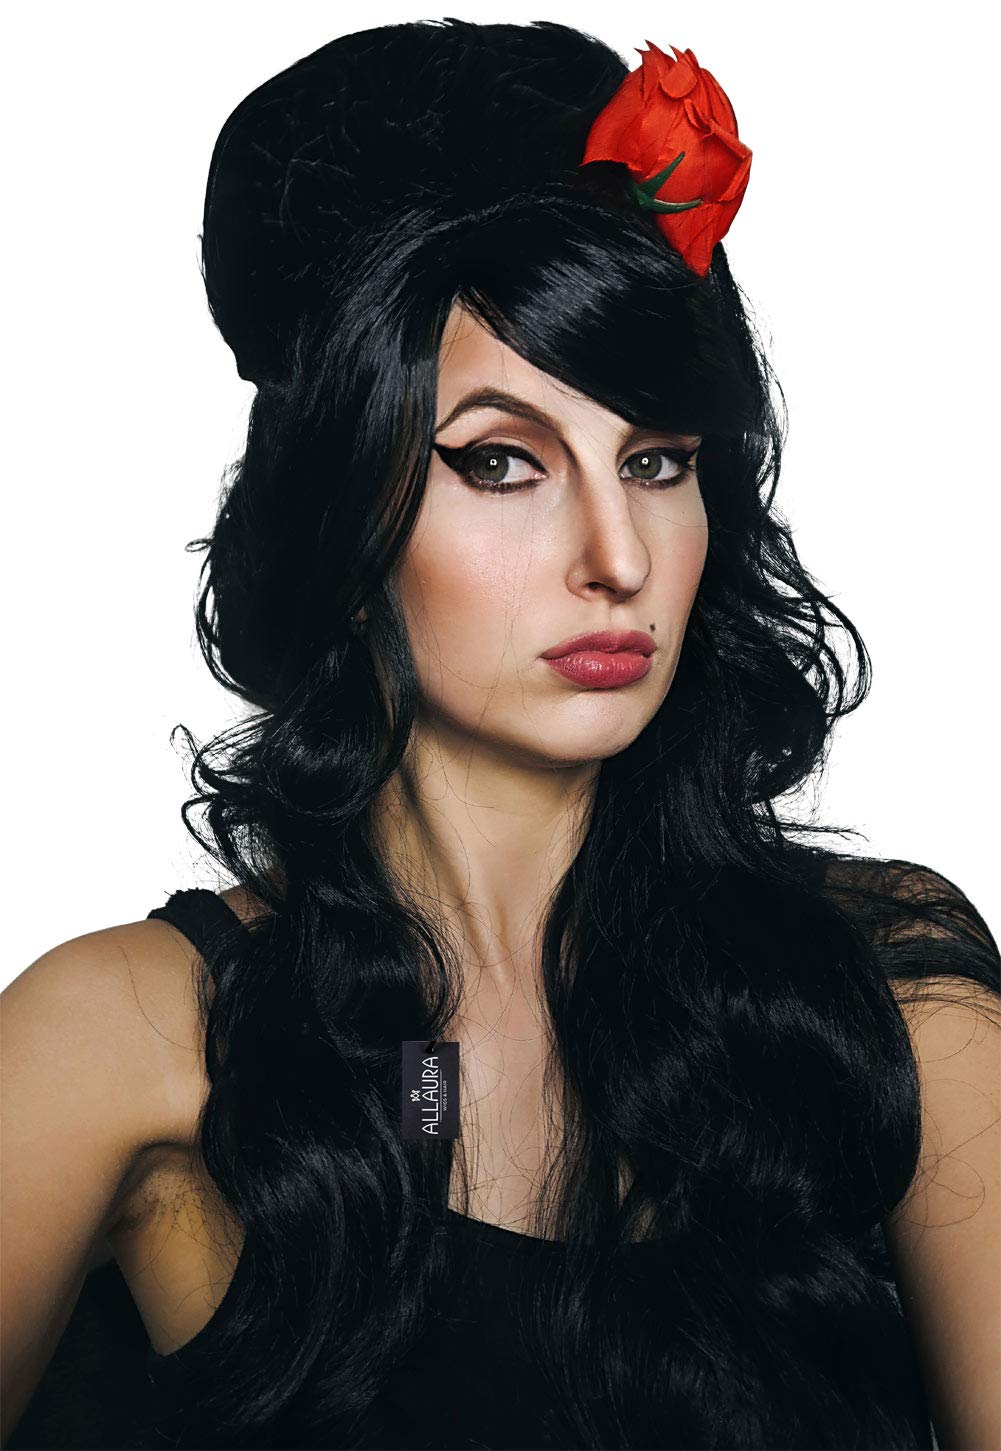 ALLAURA - Black Beehive Wig + Red Flower + Black Bouffant Beehive Wigs Long Black Wig Curly 90s Costume Wigs For Women & Girls -